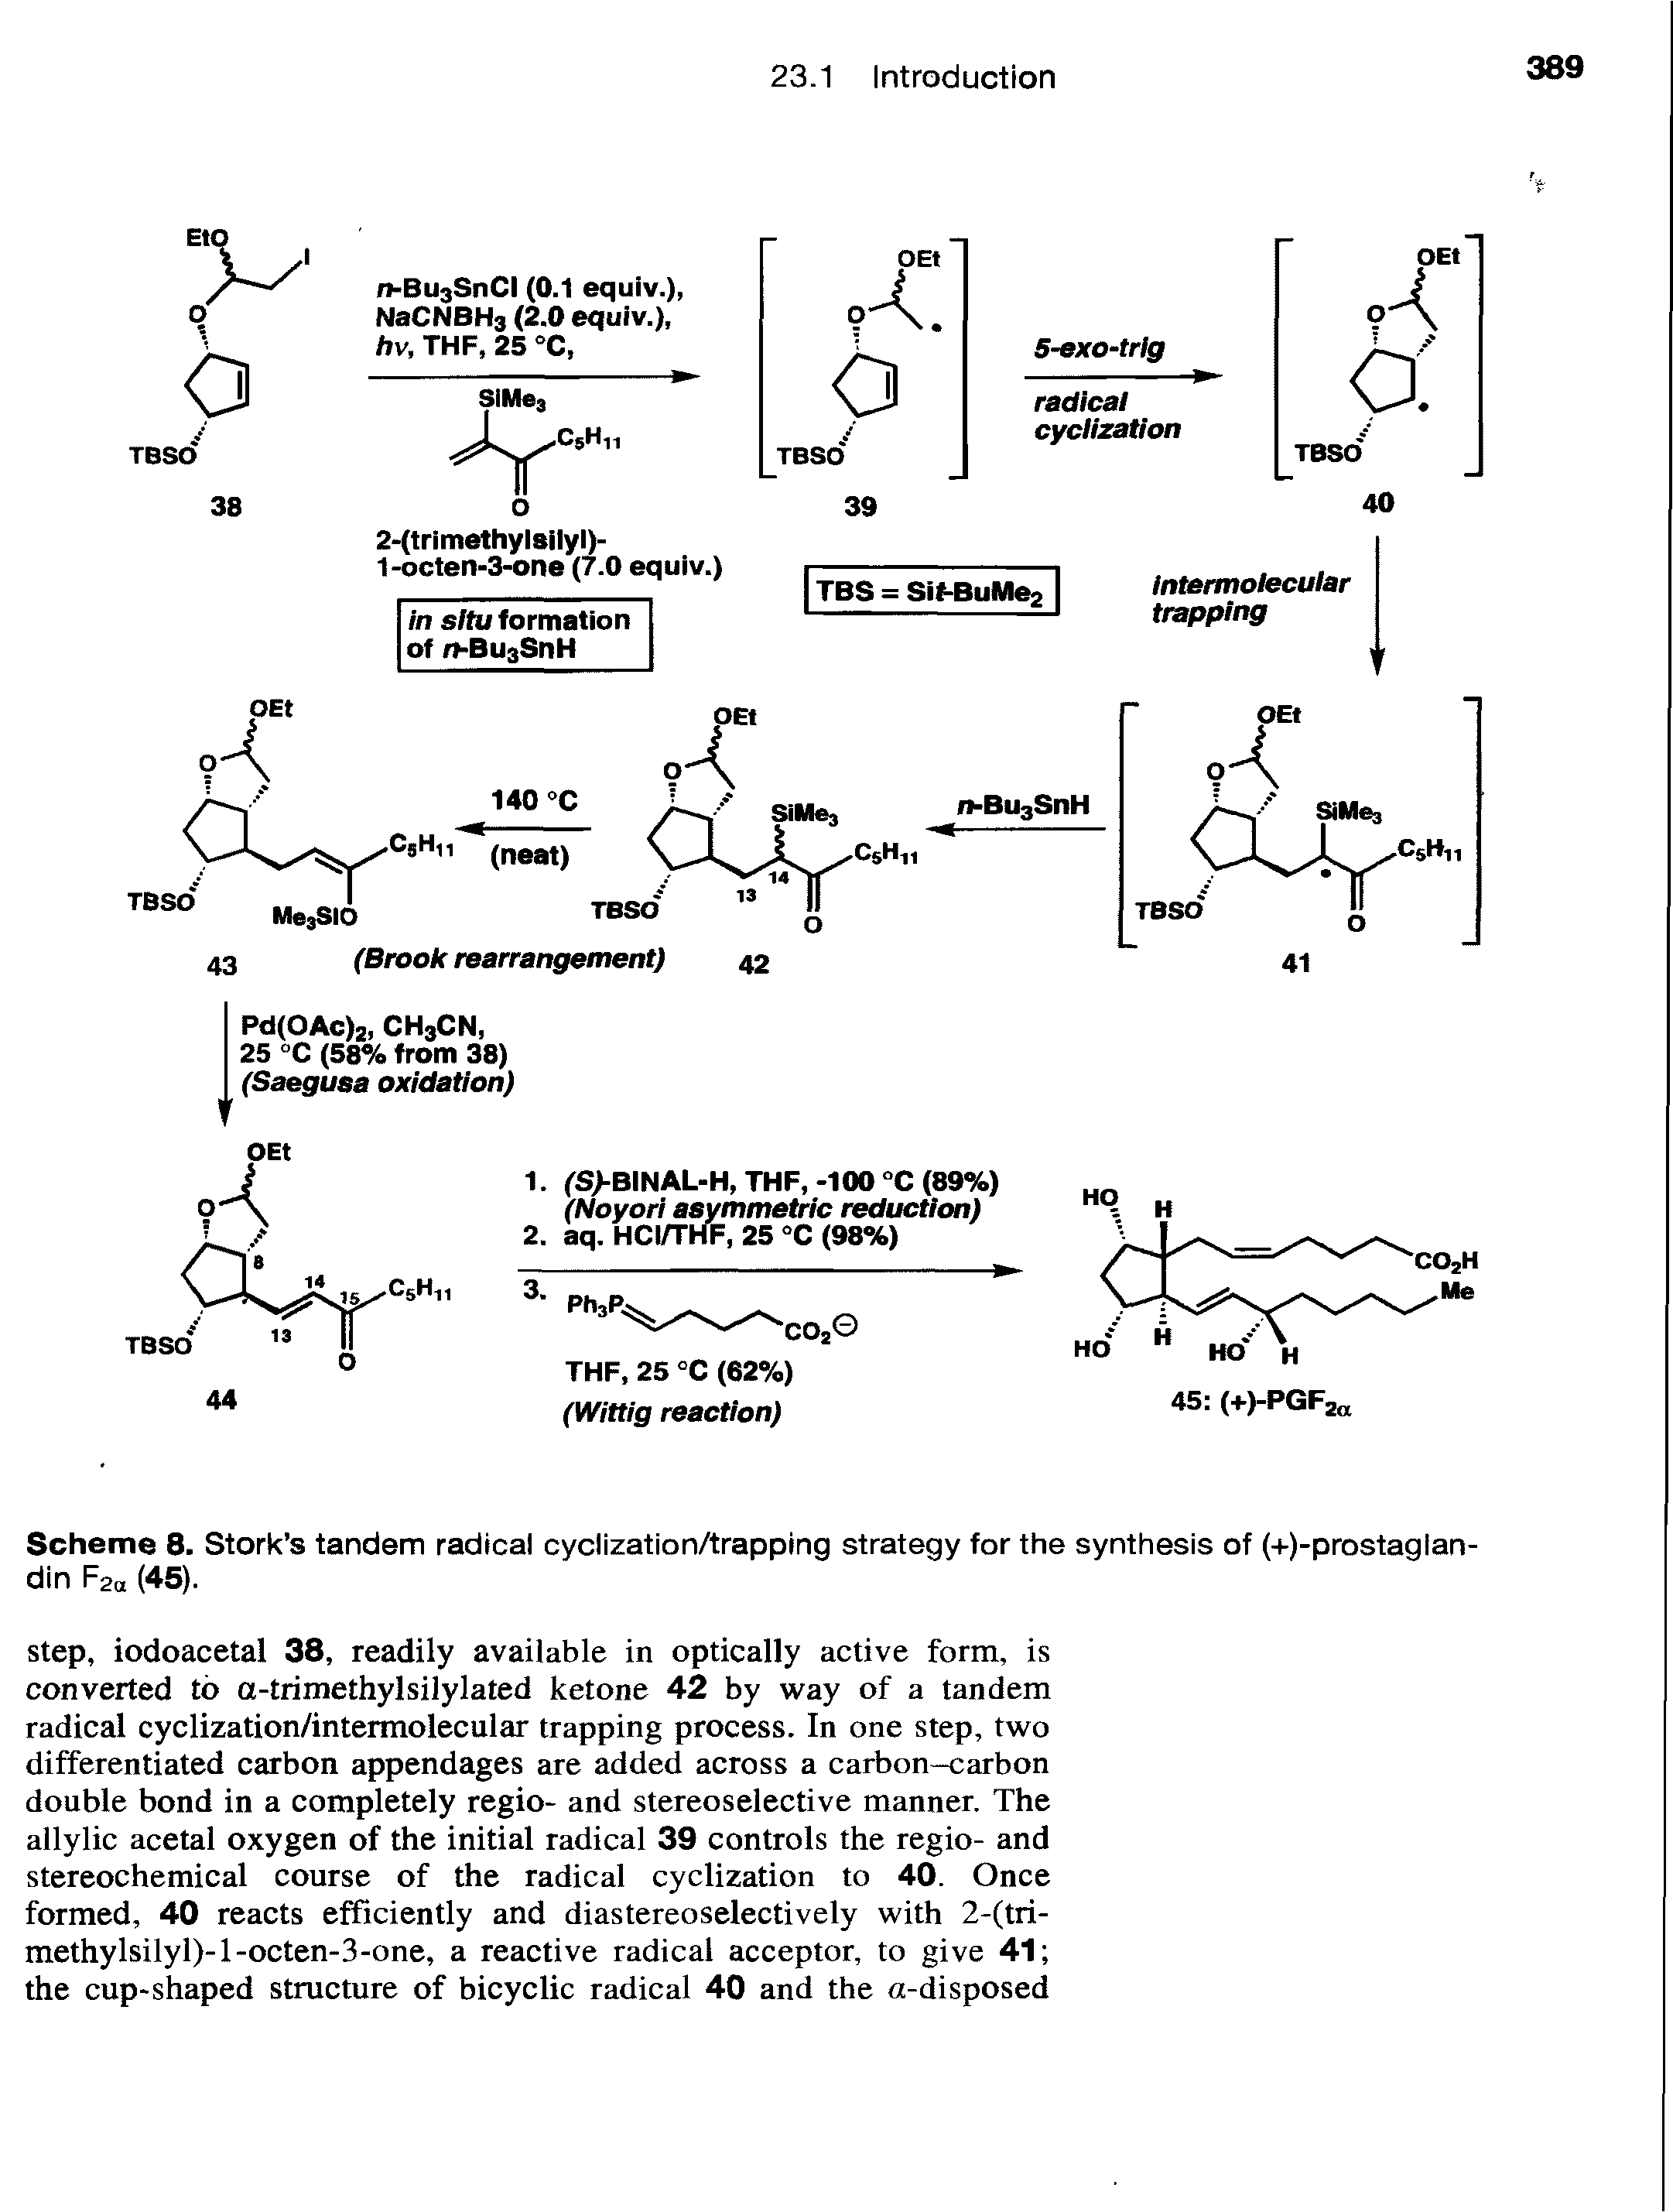 Scheme 8. Stork s tandem radical cyclization/trapping strategy for the synthesis of (+)-prostaglan-din F2a (45).